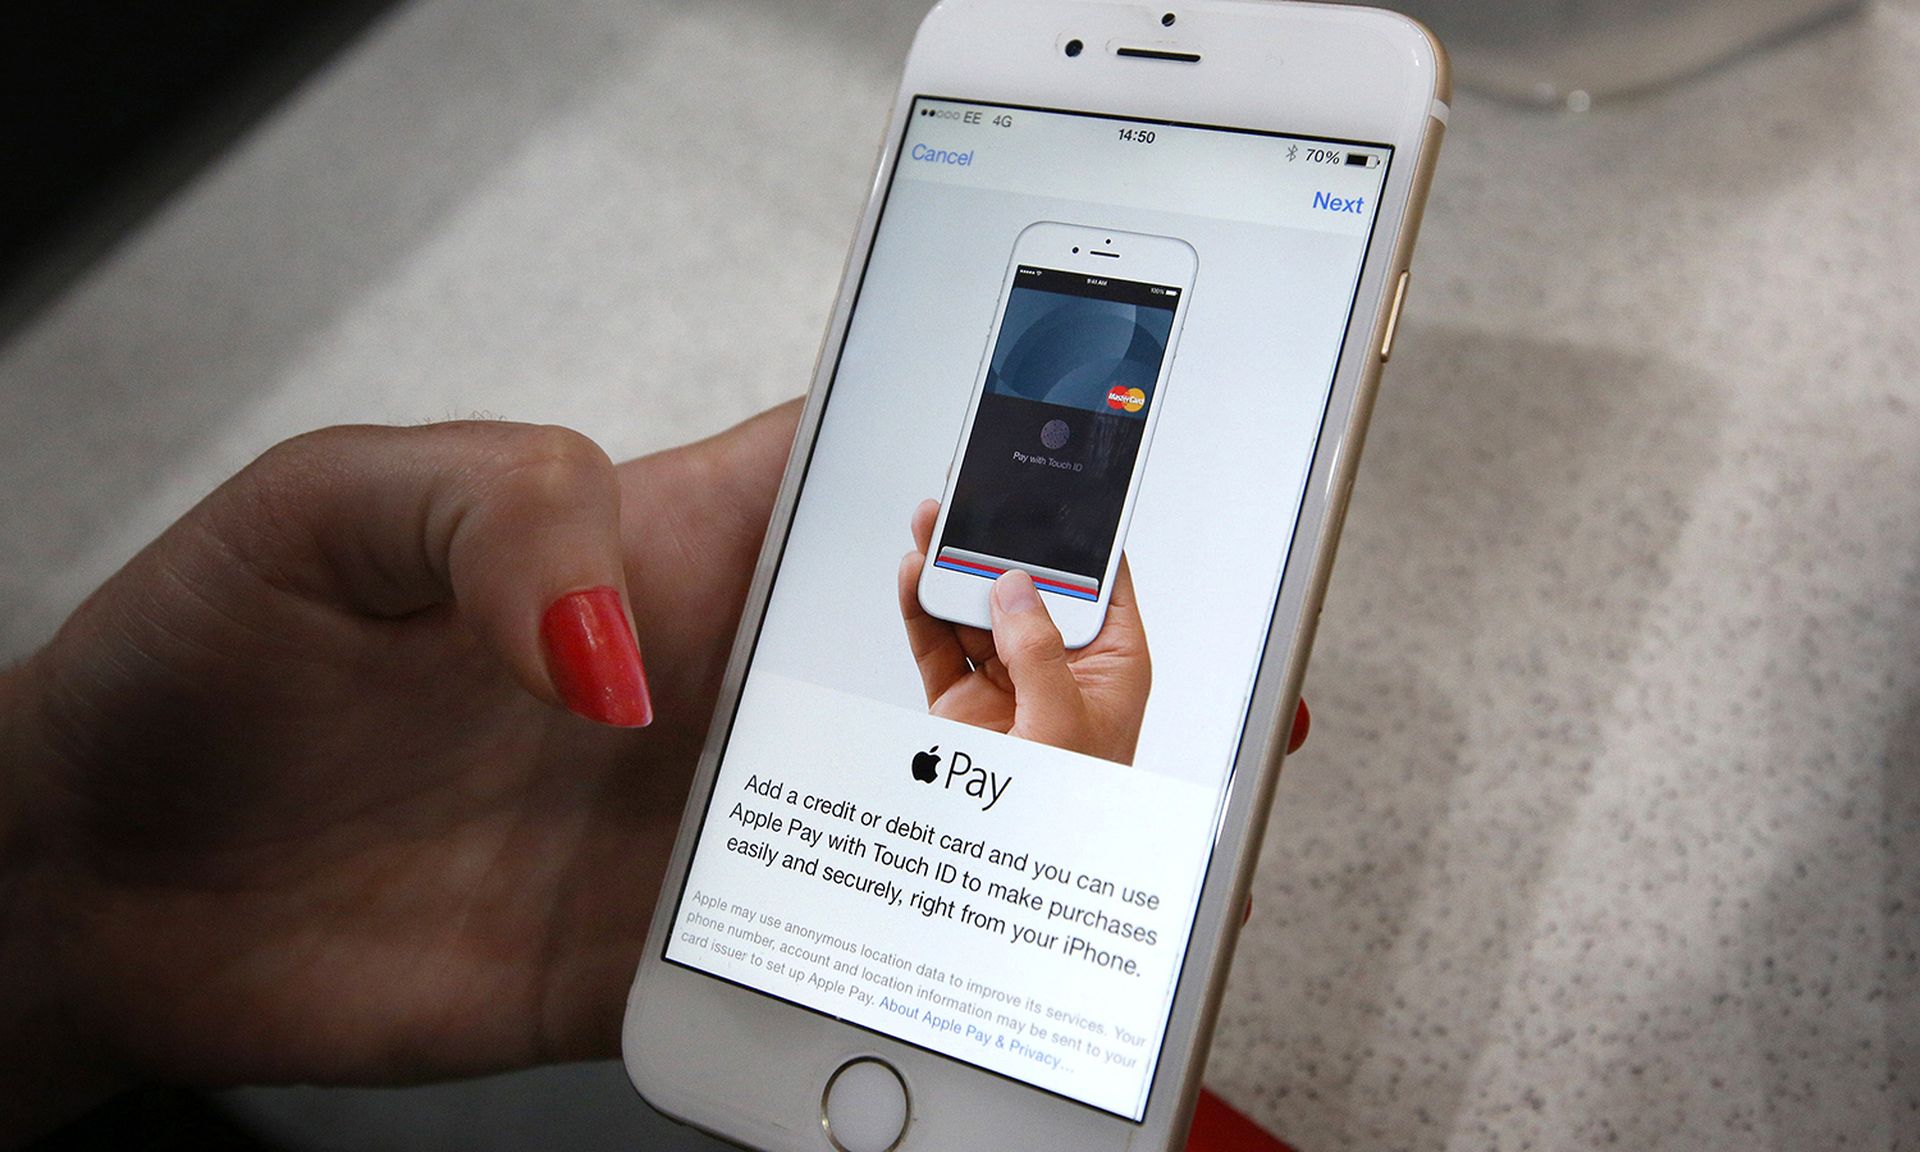 An iPhone is used to make an Apple Pay purchase at The Post Office on July 14, 2015, in London. (Photo by Peter Macdiarmid/Getty Images)